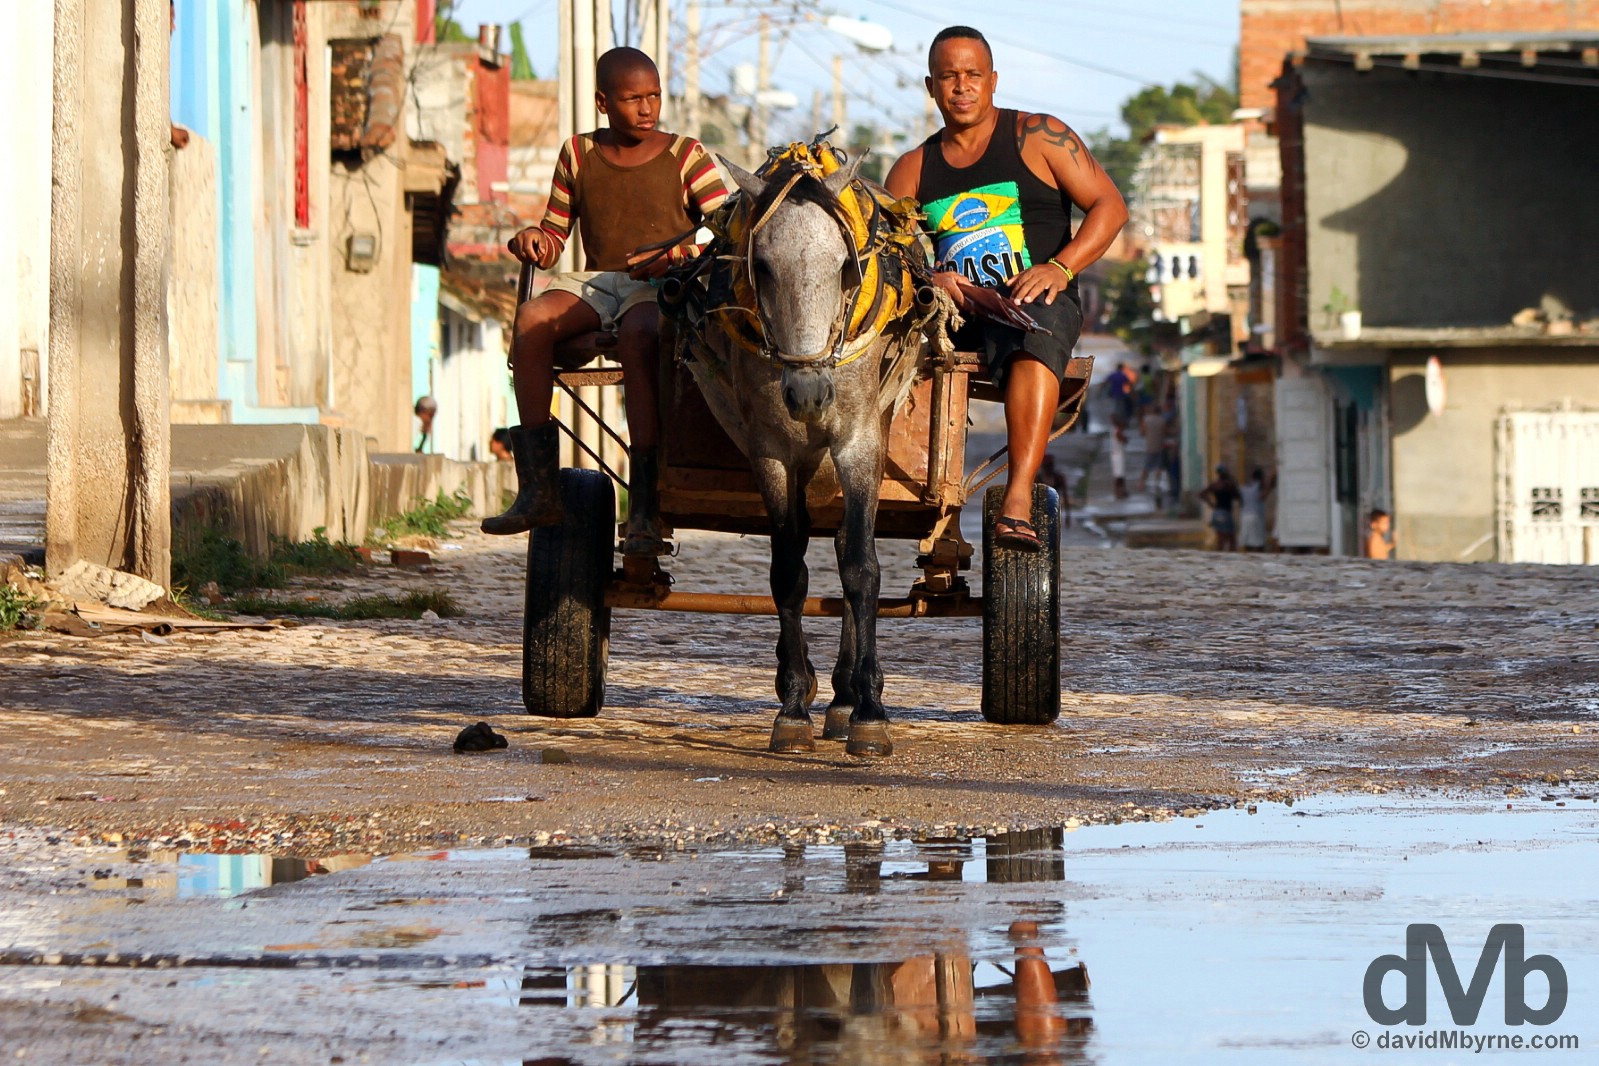 On the streets of Trinidad, Cuba. May 5, 2015.